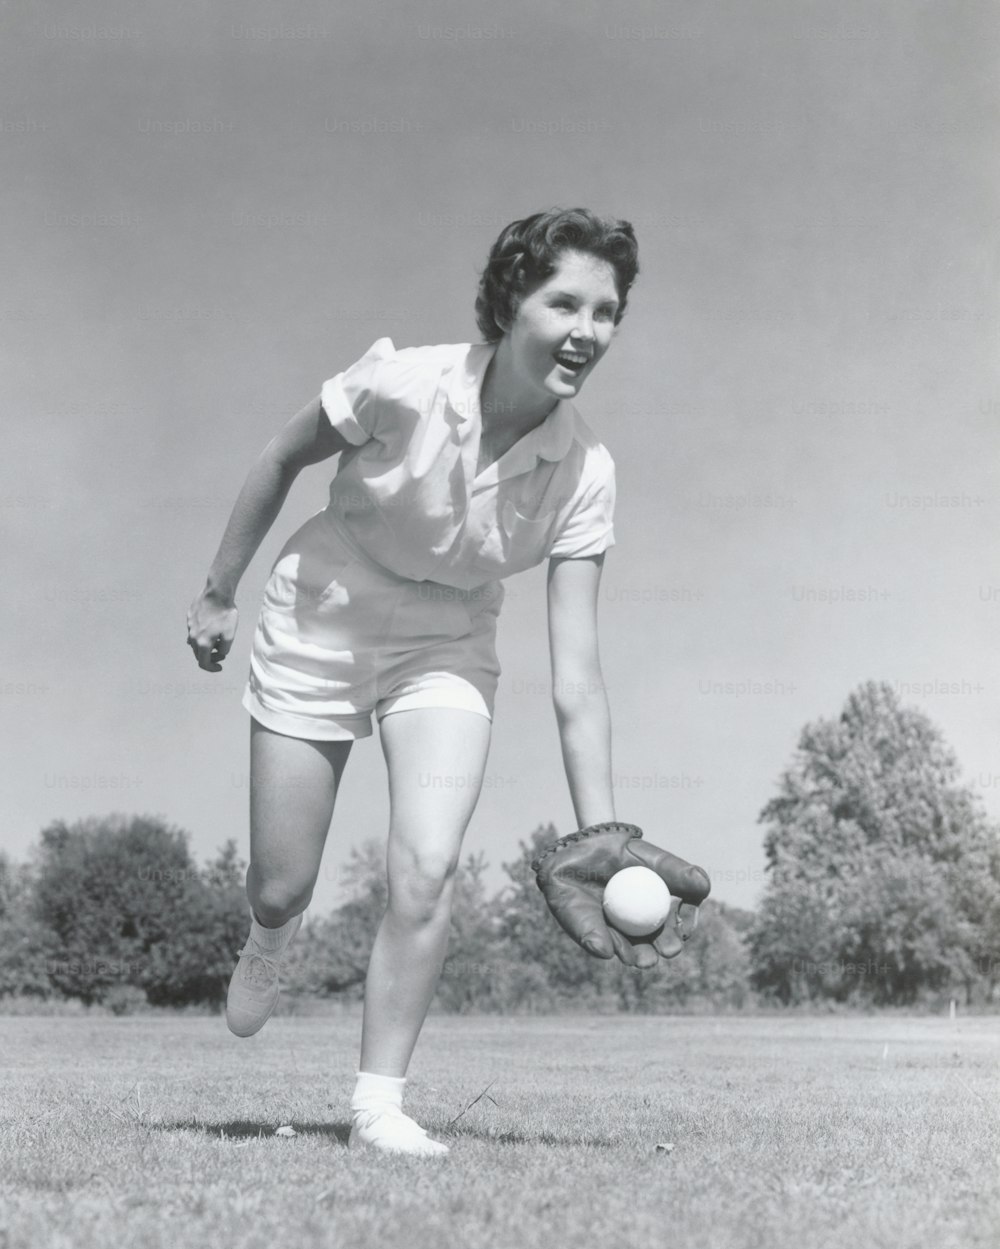 UNITED STATES - CIRCA 1950s:  Young woman catching baseball in glove.